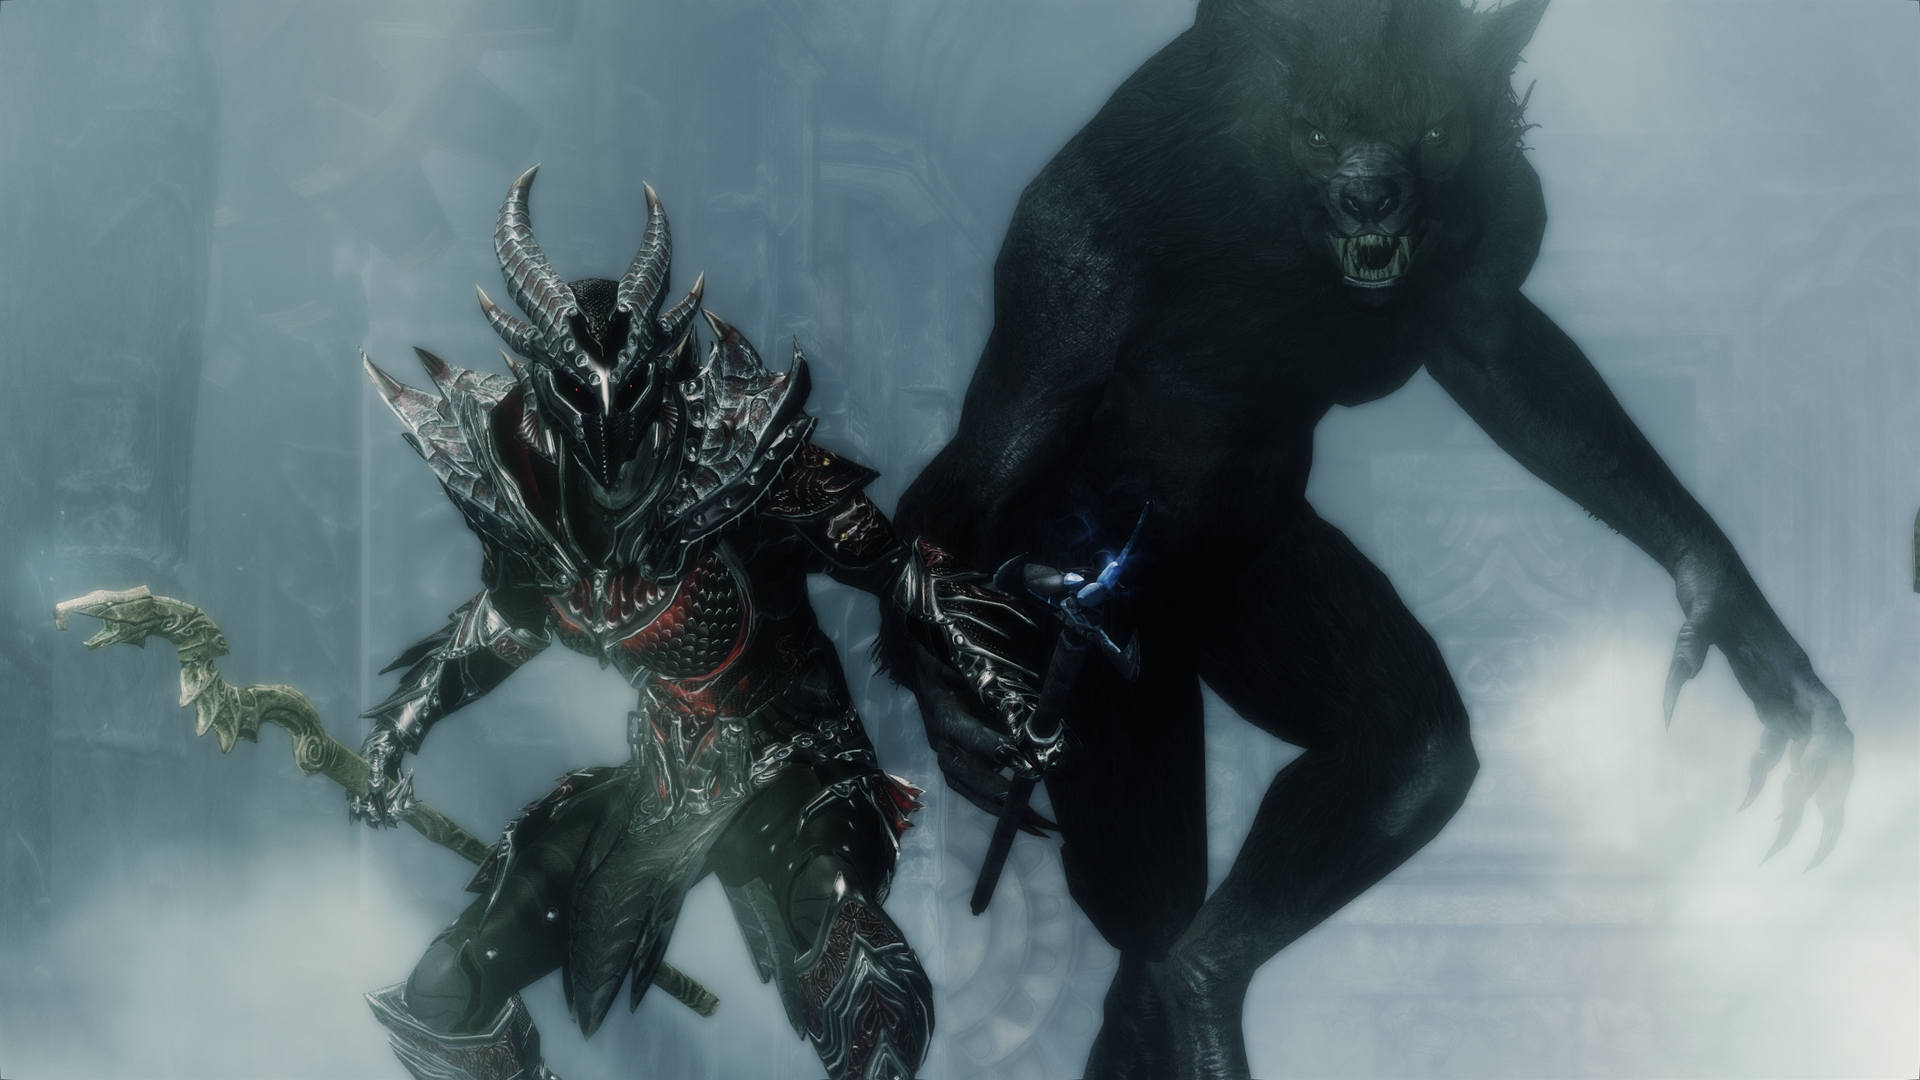 Awesome Battle Pose Of A Follower And Panion Werewolf From Skyrim